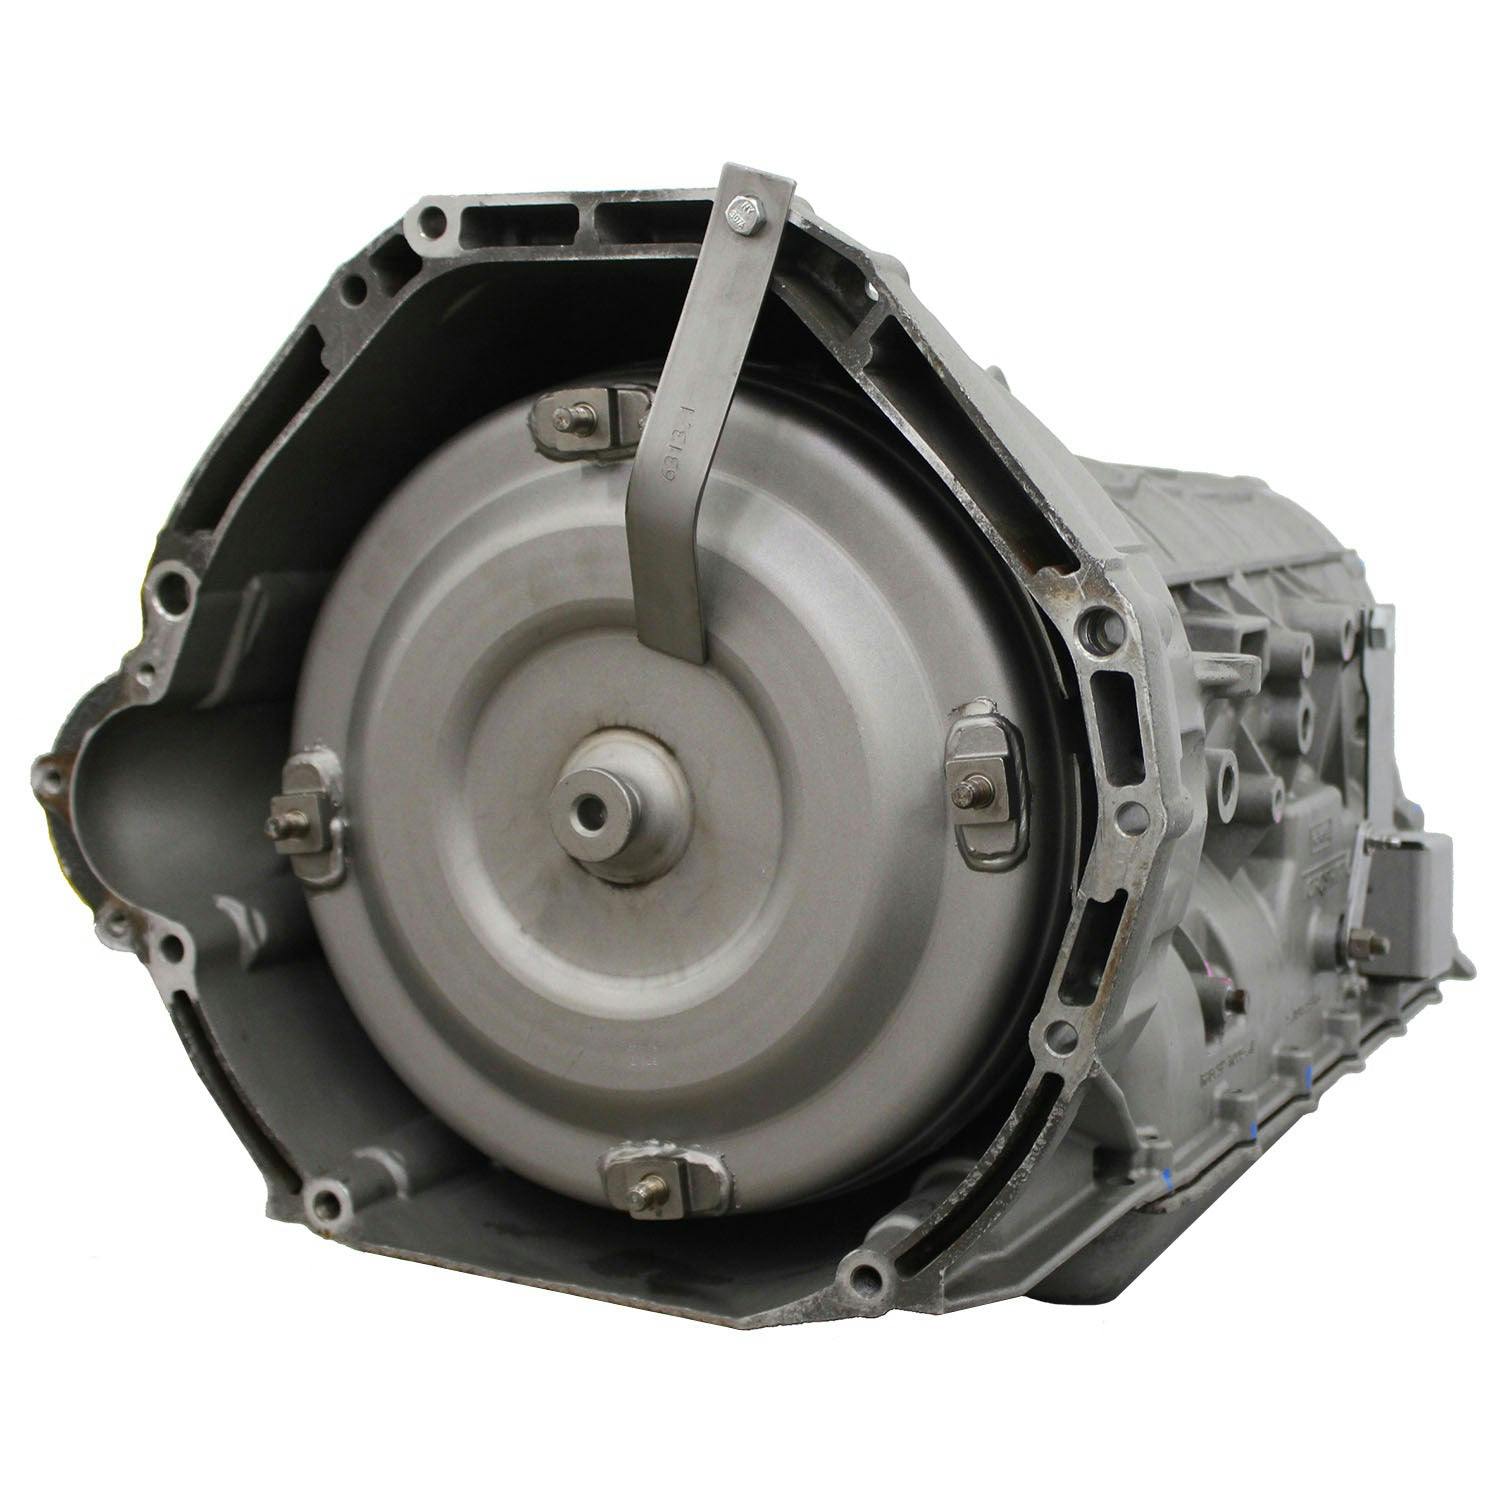 Automatic Transmission for 2012-2014 Ford F-250/350 Super Duty RWD with 6.2L V8 Engine